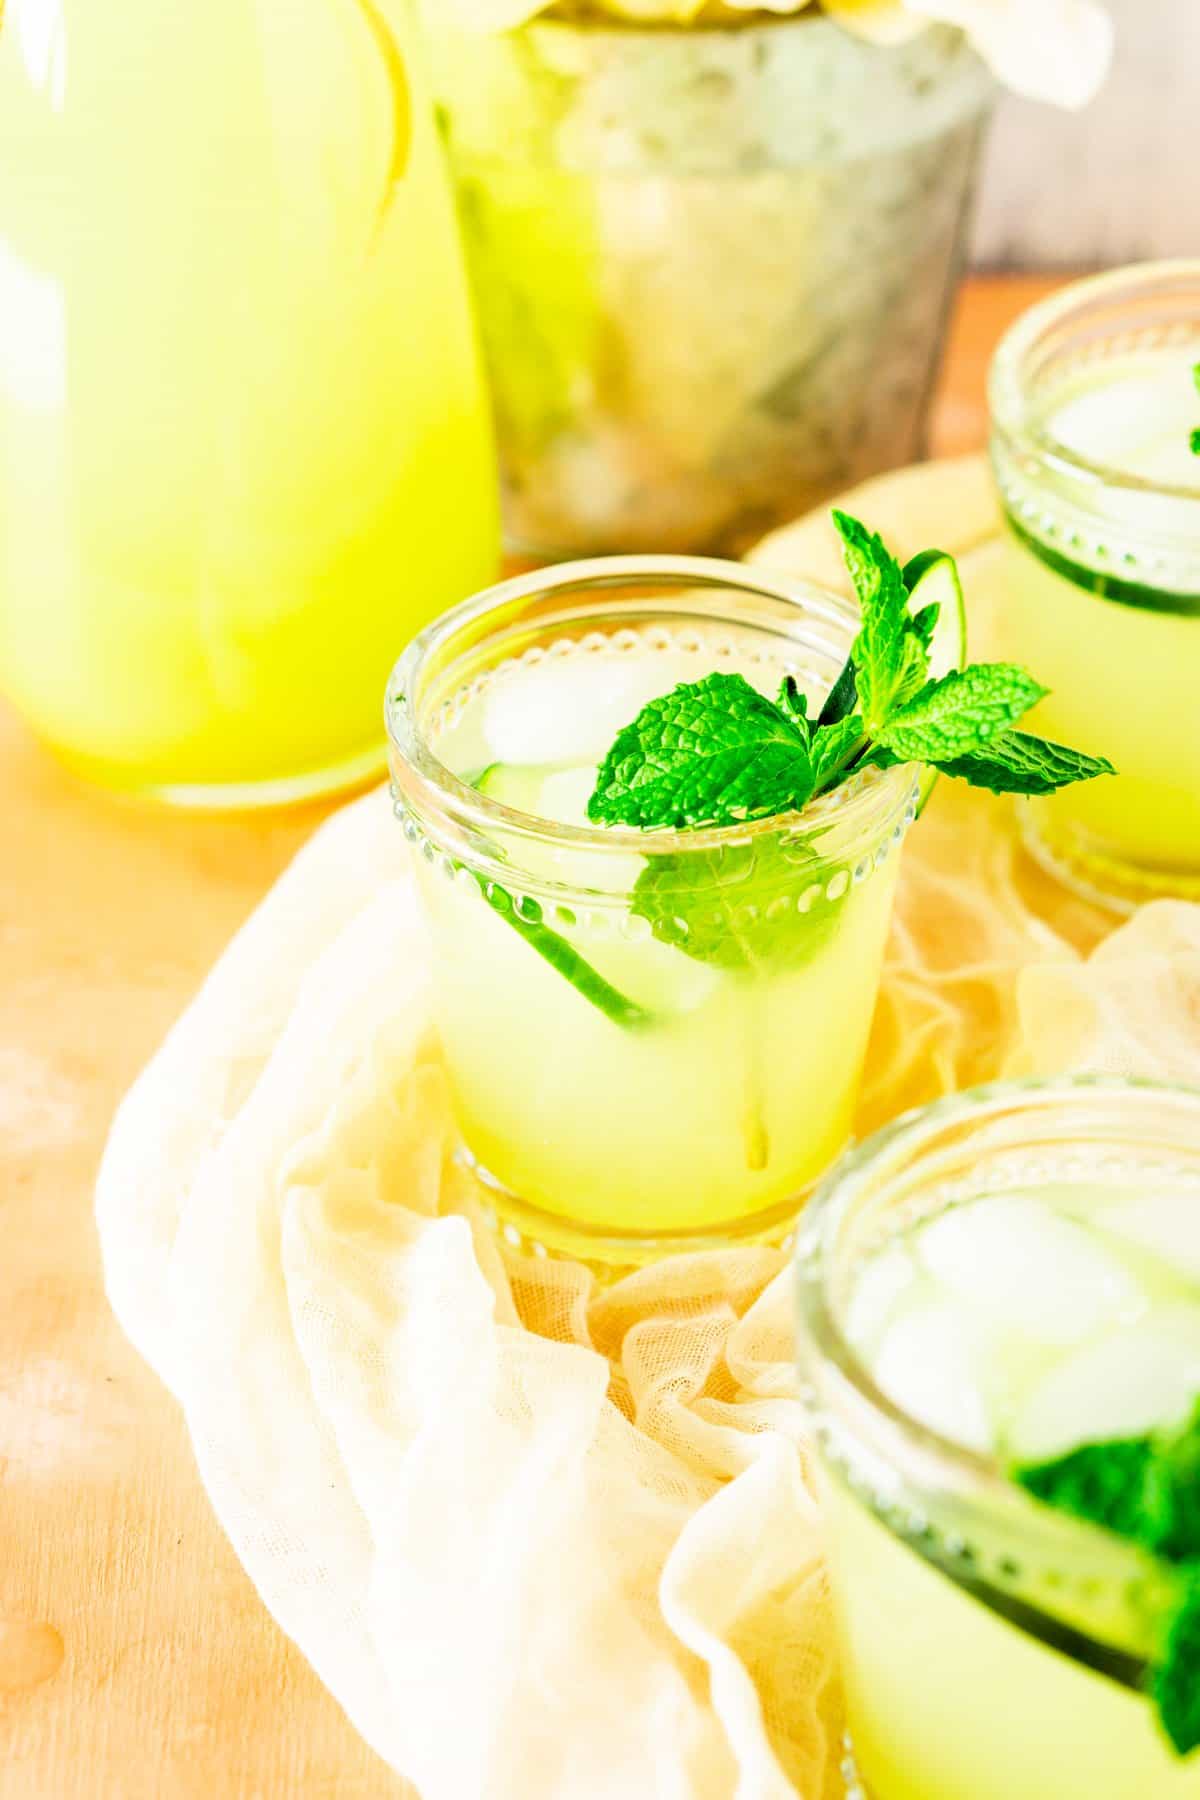 A glass of mint-cucumber lemonade with two other glasses in the foreground and background.